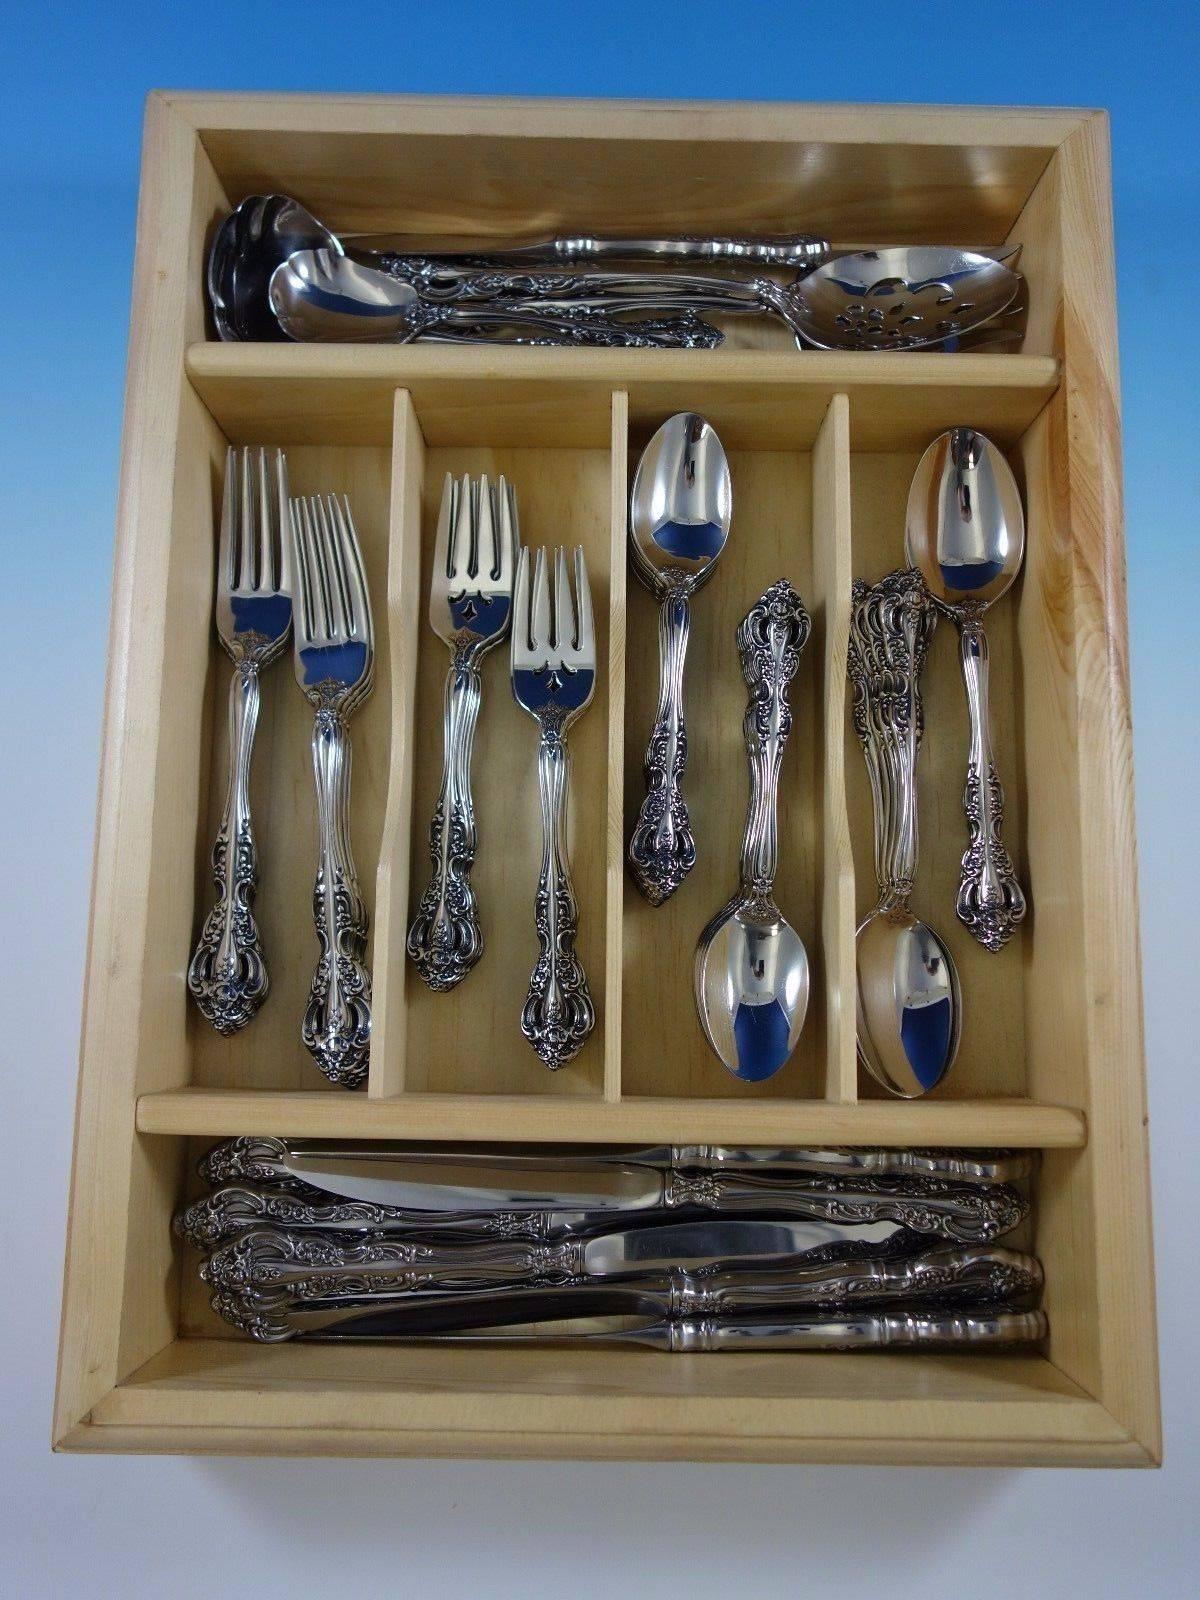 Michelangelo by Oneida Stainless steel estate flatware set of 53 pieces. This set includes: Eight knives, 9